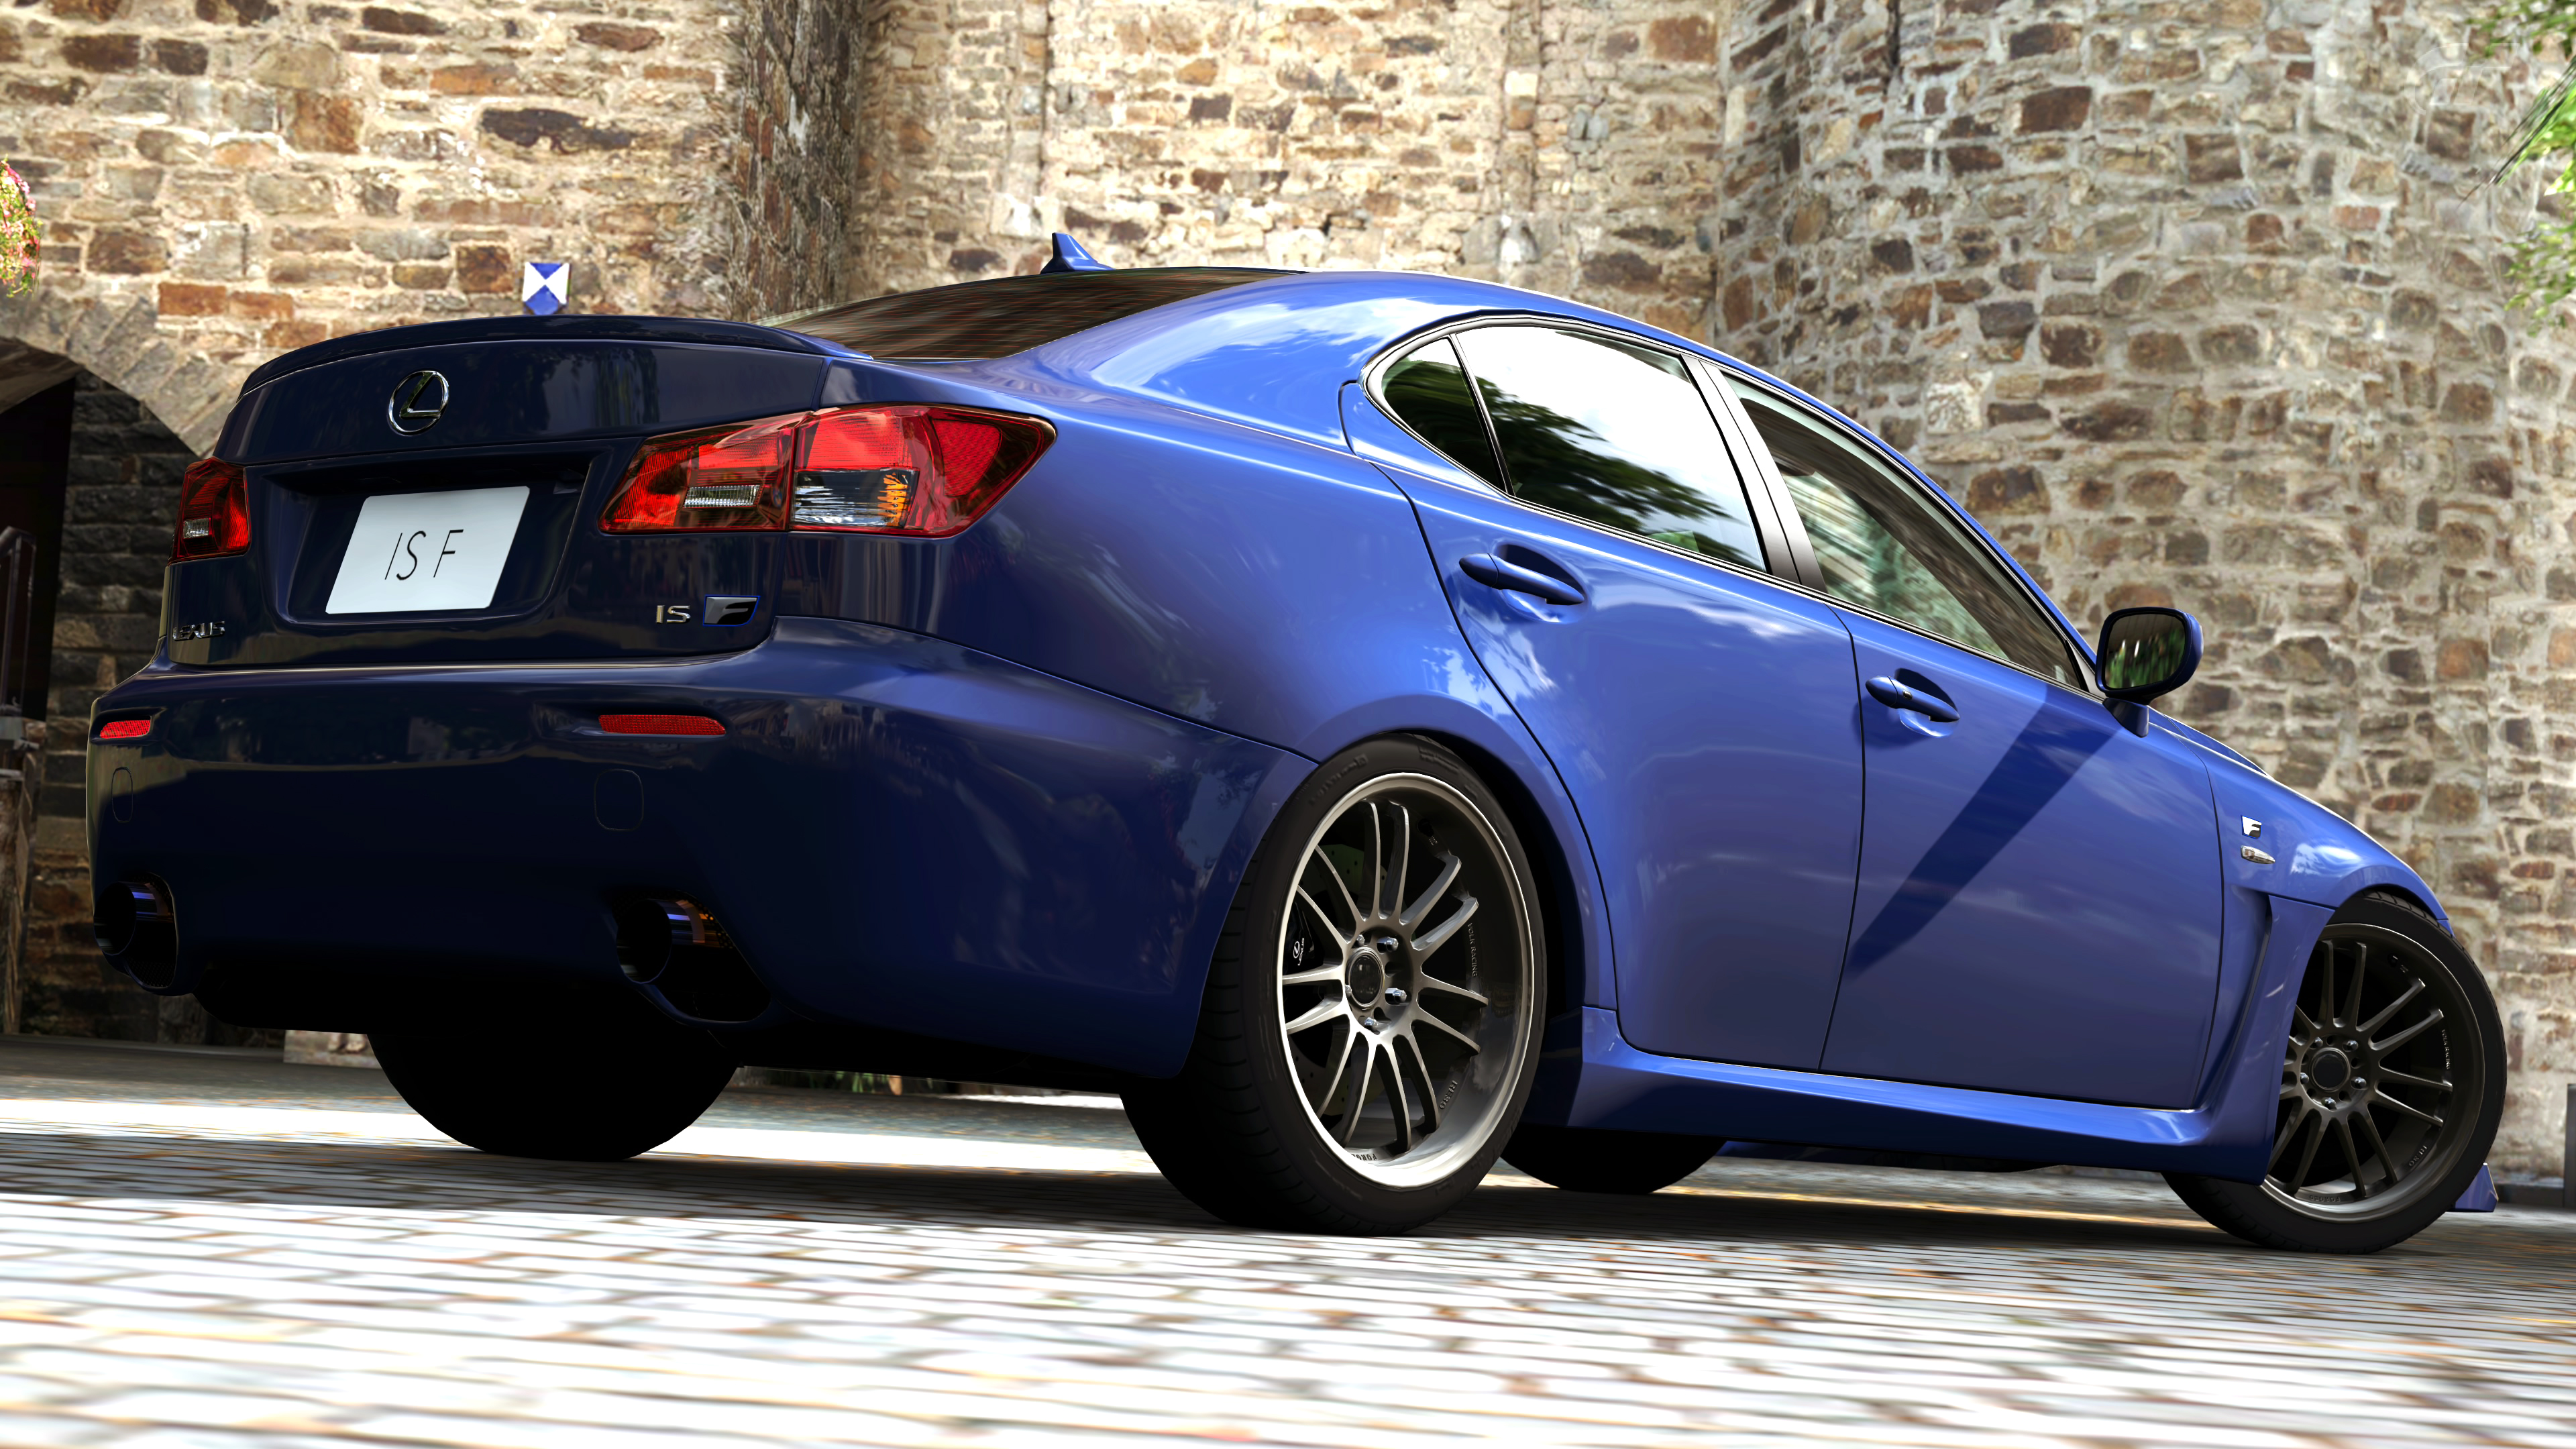 2007 Lexus IS F (Gran Turismo 5) by Vertualissimo on